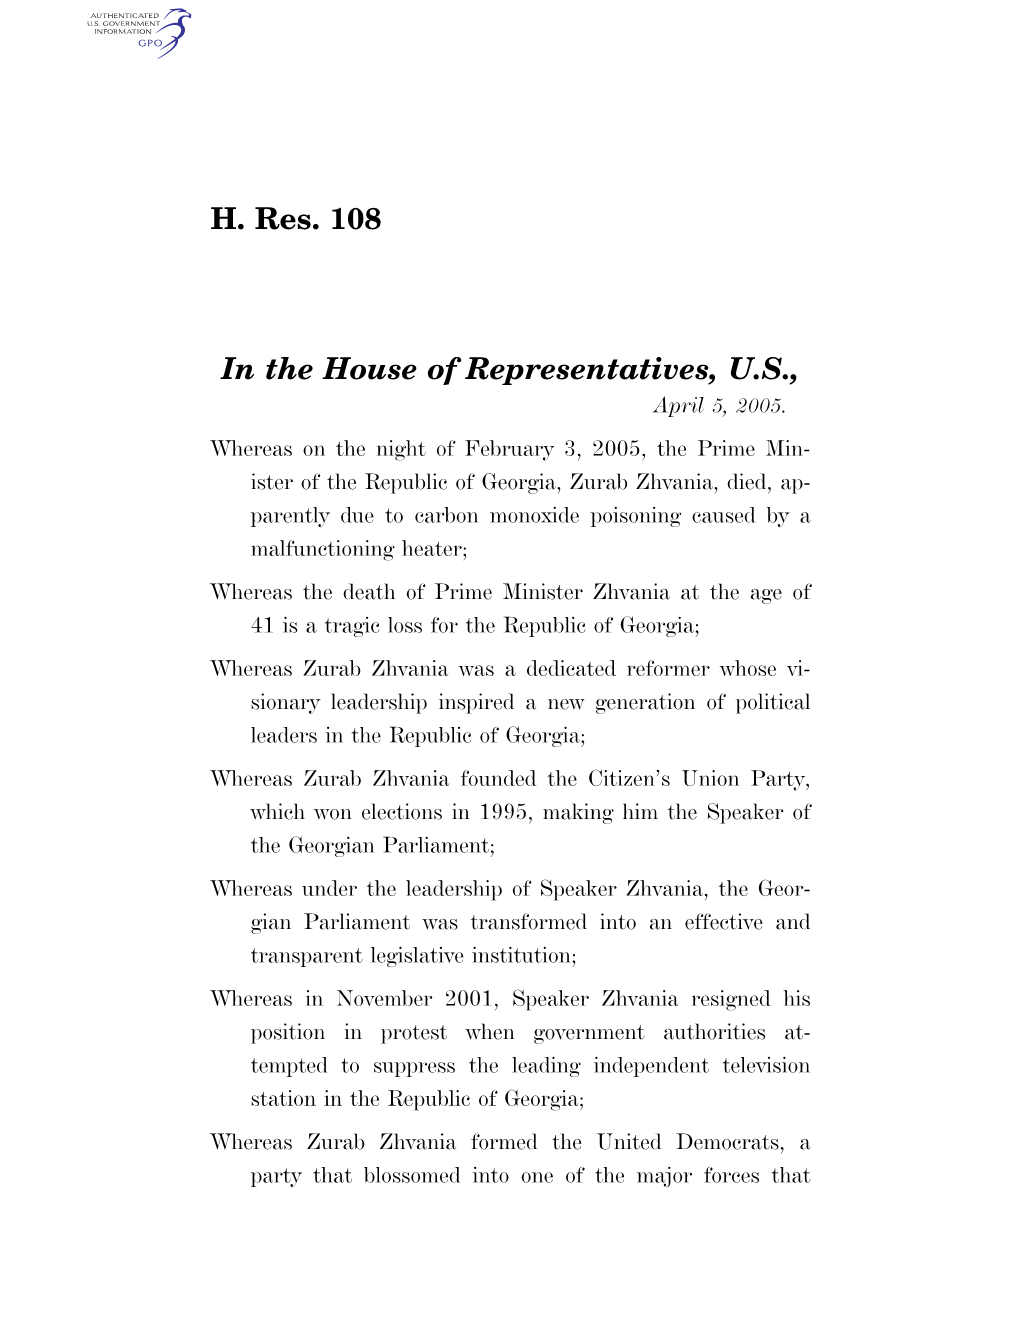 H. Res. 108 in the House of Representatives, U.S